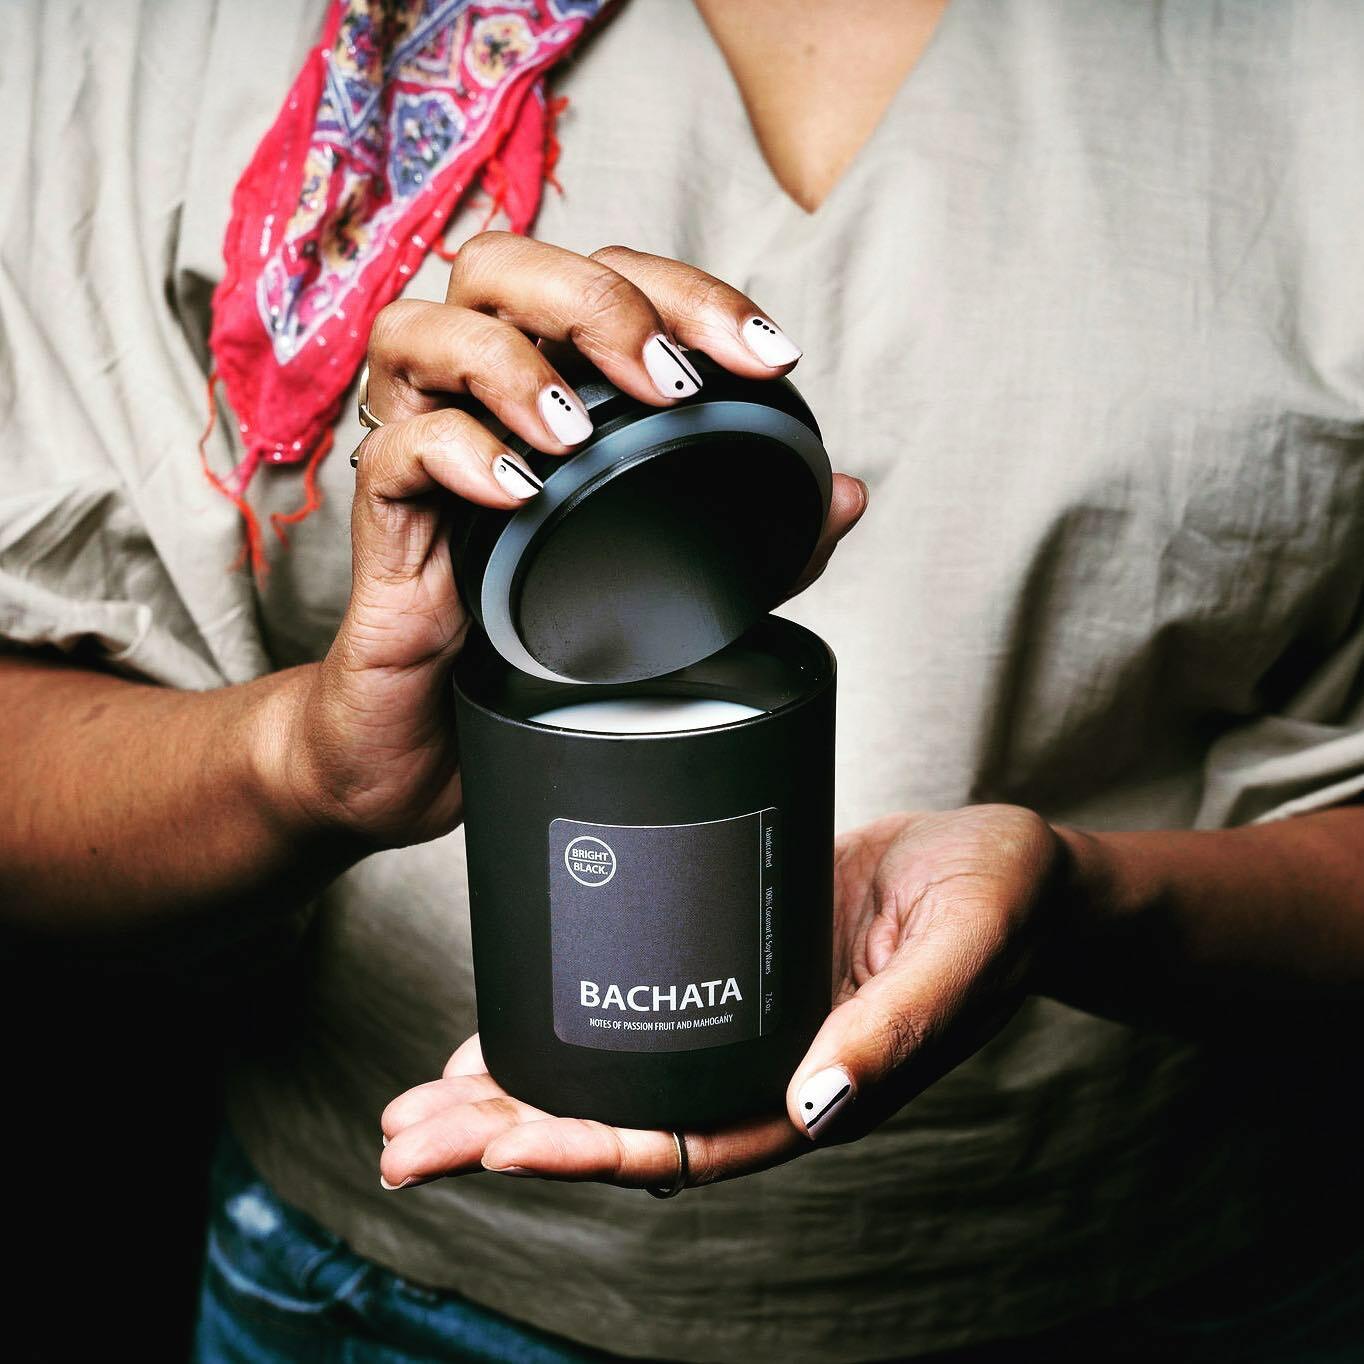 A woman holding a candle with a black container and black lid and label that says Kingston. She holds the lid open to reveal off-white wax.